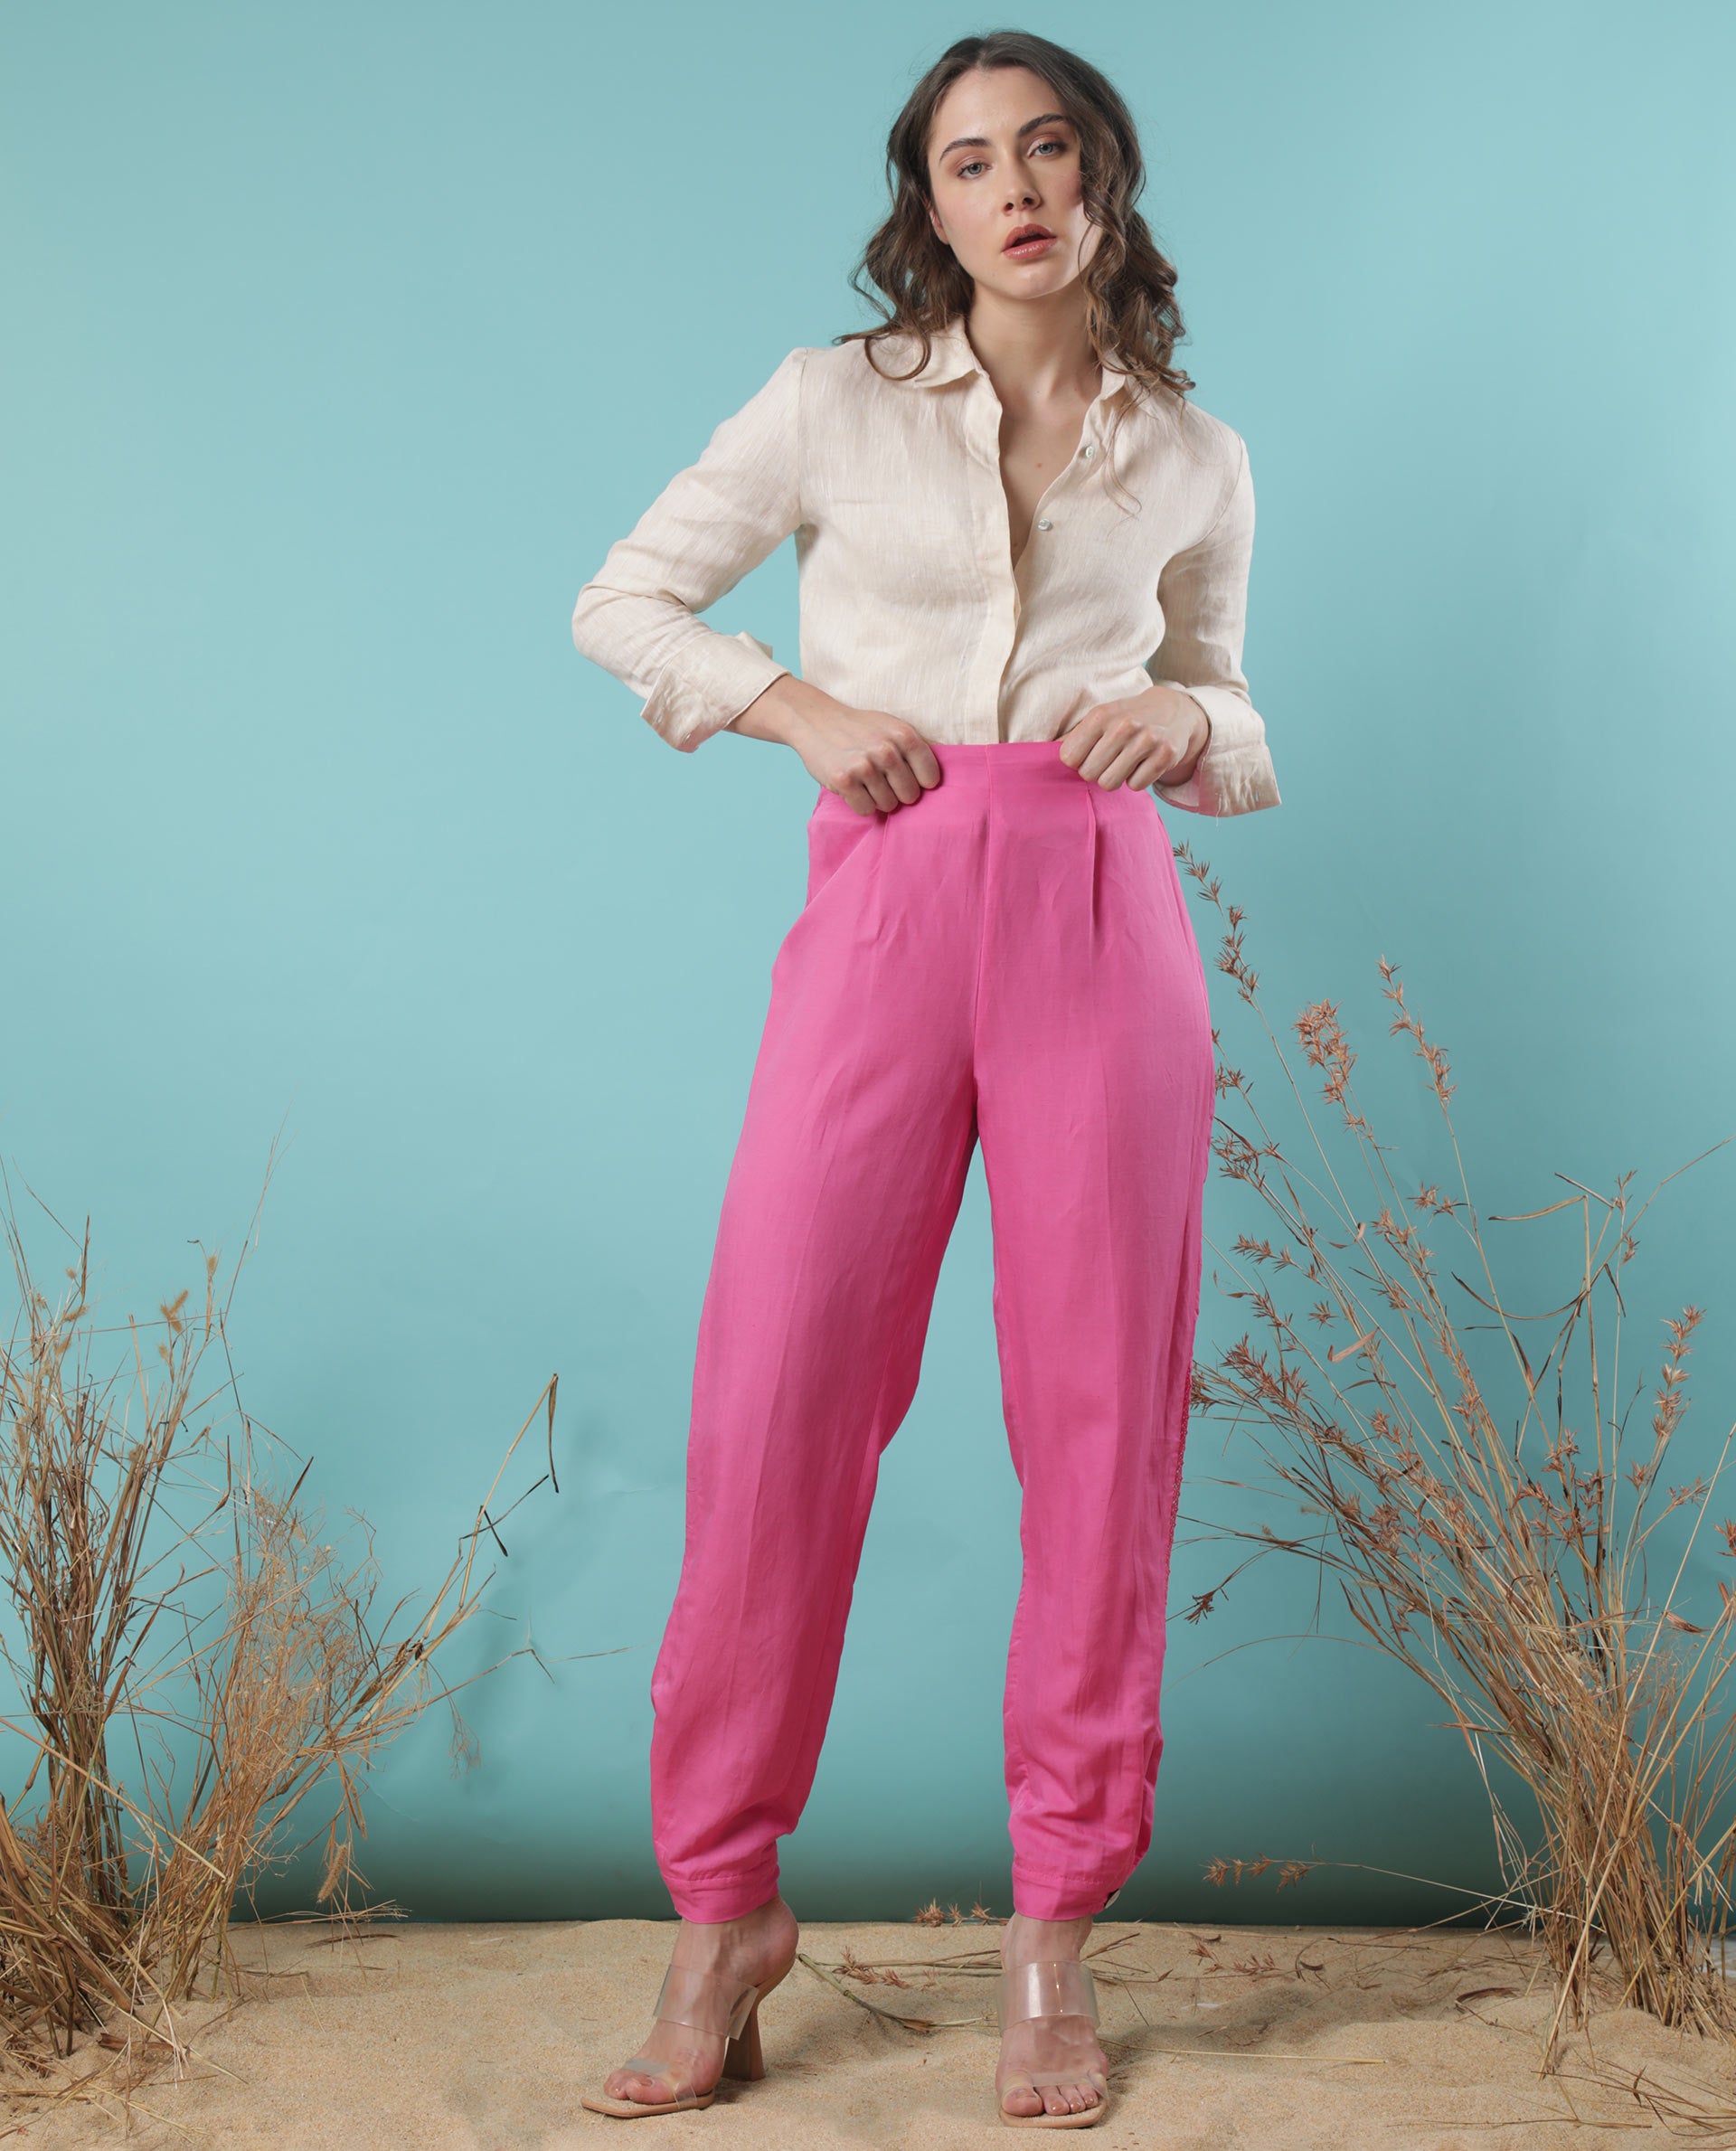 Pink, Tailored Ankle Length Trouser